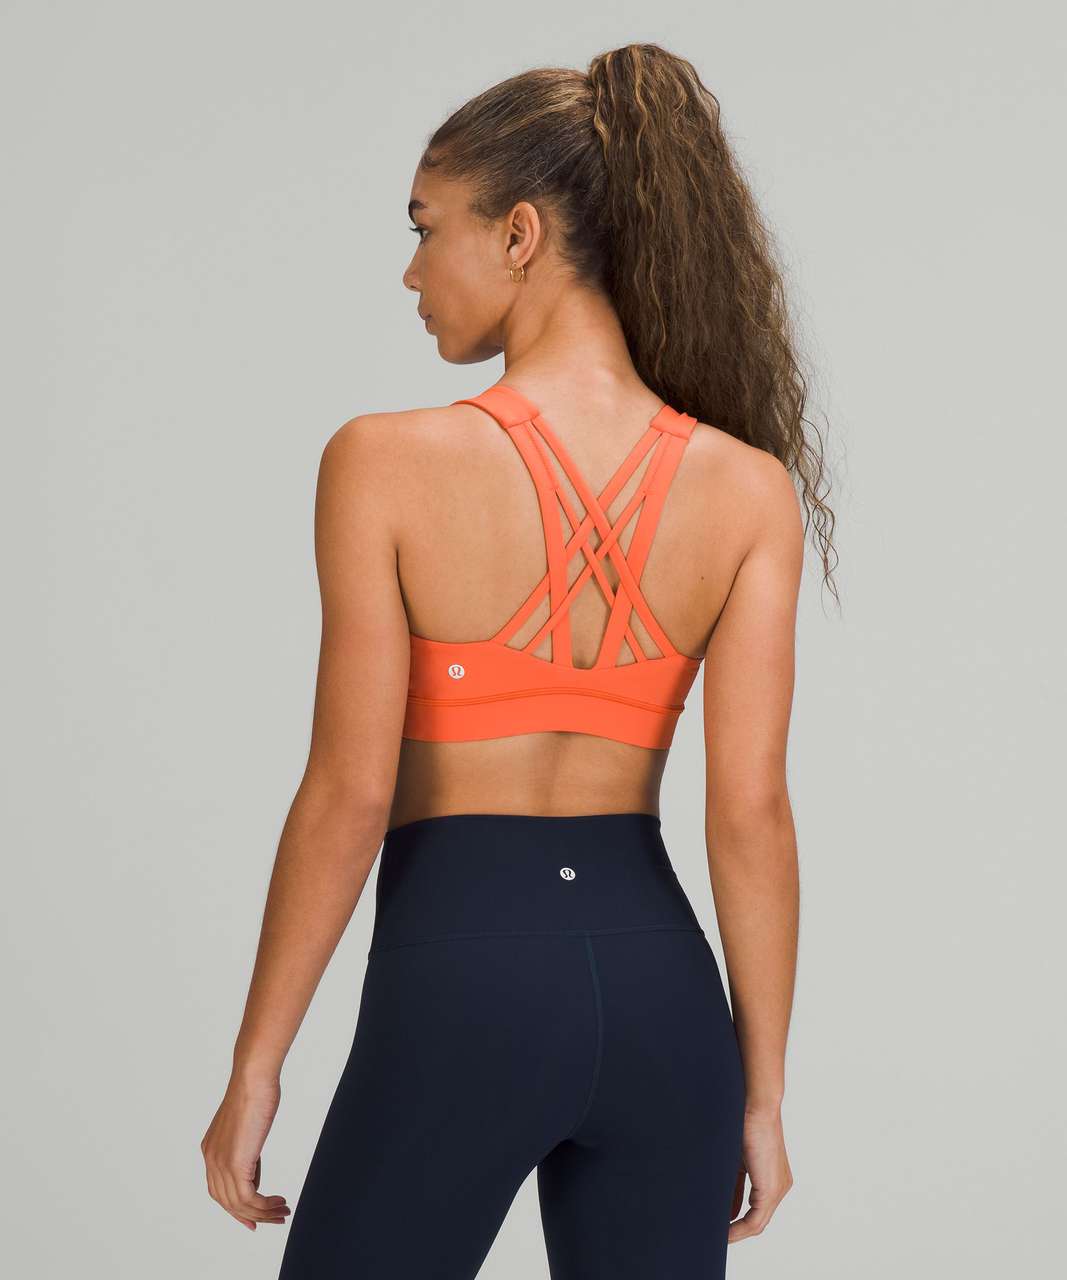 Lululemon Free to Be Elevated Bra *Light Support, DD/DDD(E) Cup - Warm Coral